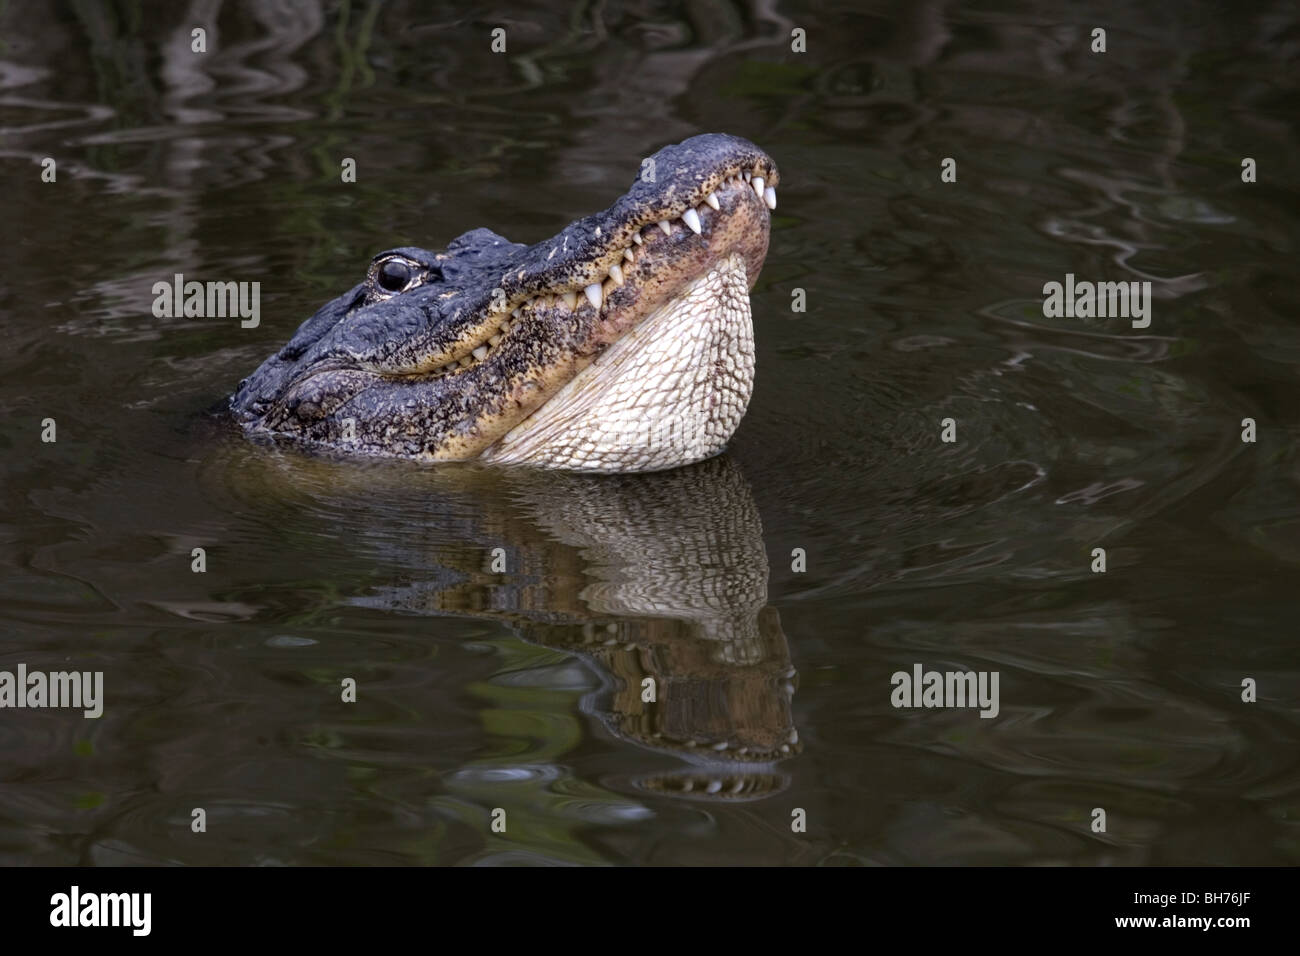 Male alligator bellowing Stock Photo